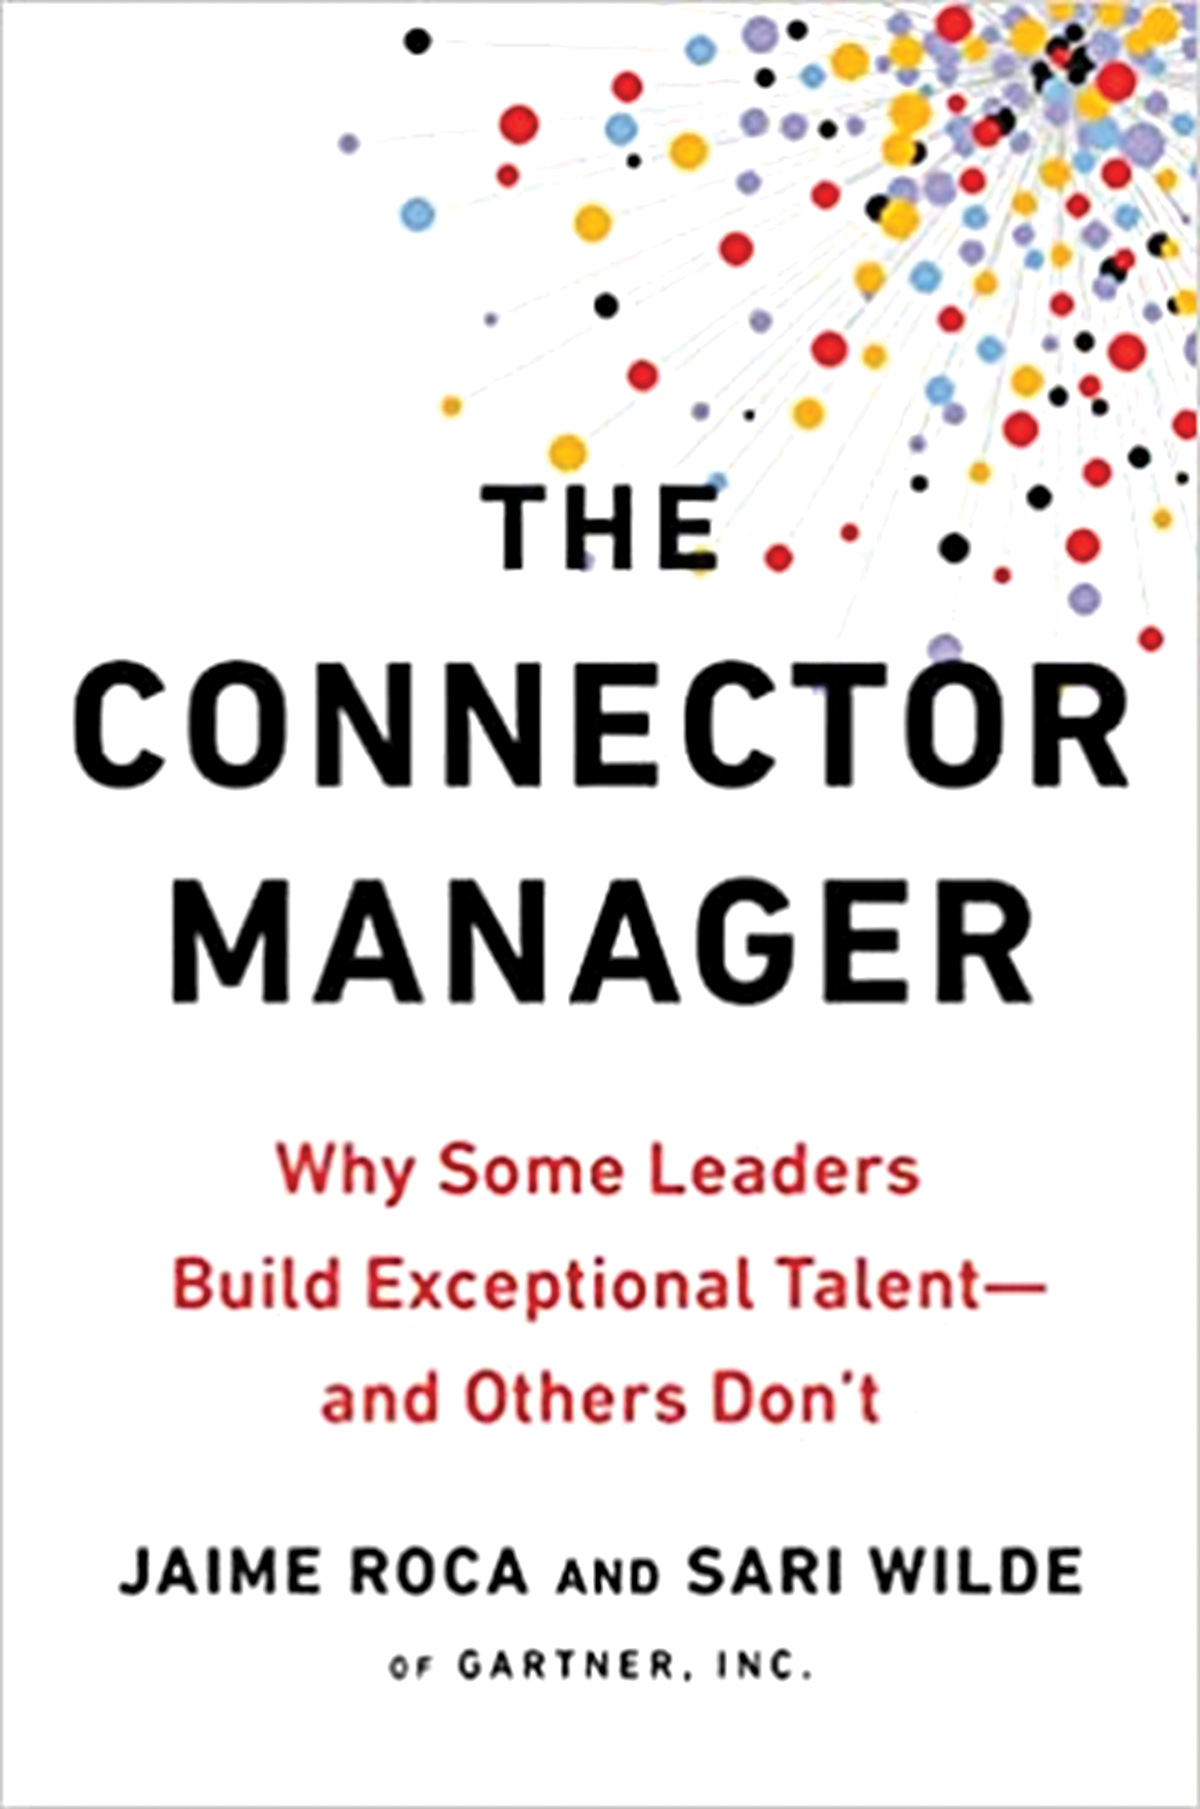 The Connector Manager: Why Some Leaders Build Exceptional Talent – and Others Don’t